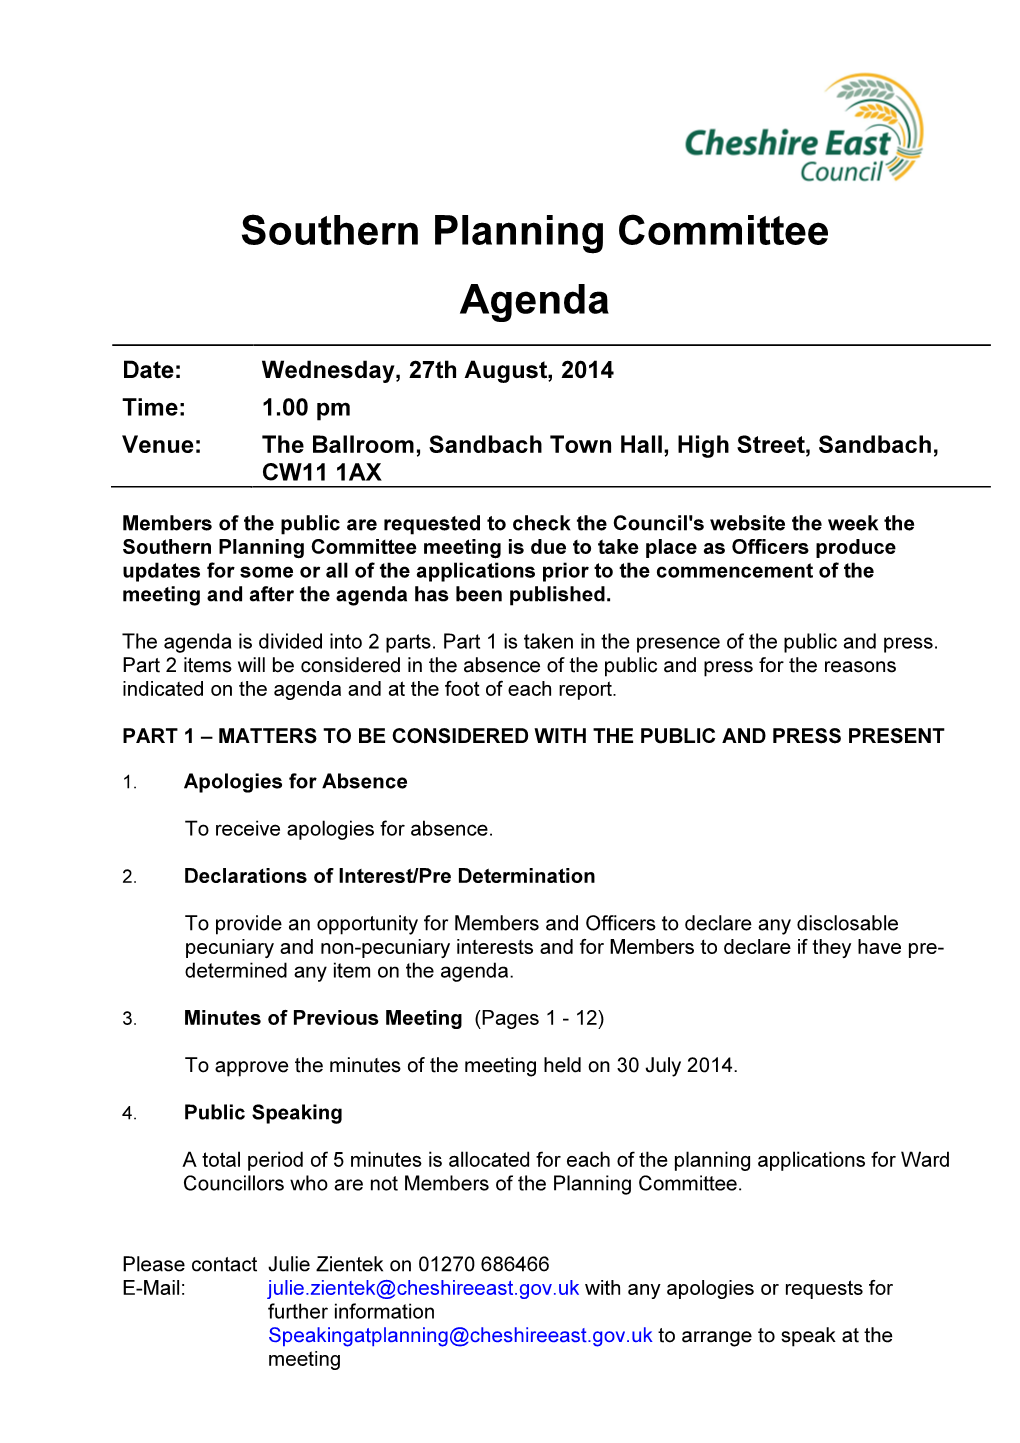 Southern Planning Committee Agenda